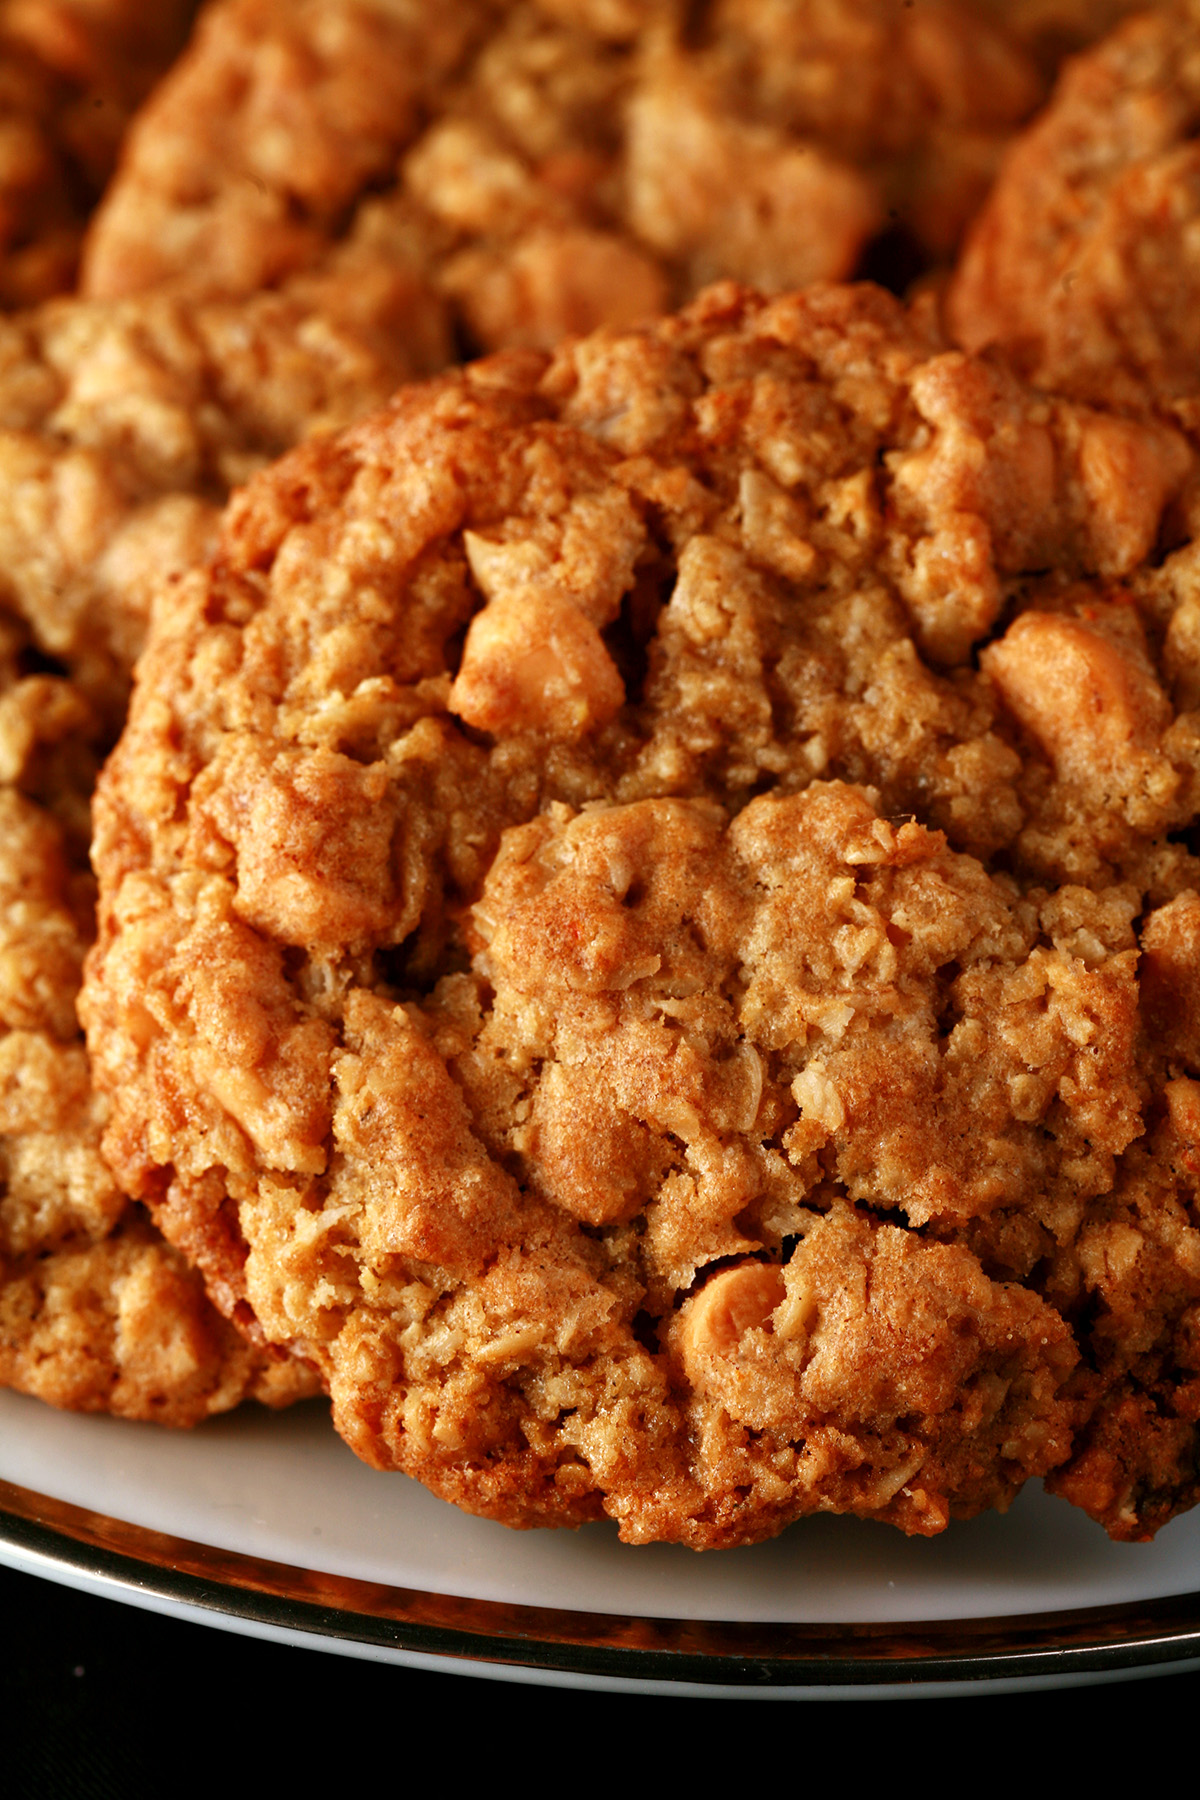 Close up photo of a plate of oatmeal cookies with visible butterscotch chips